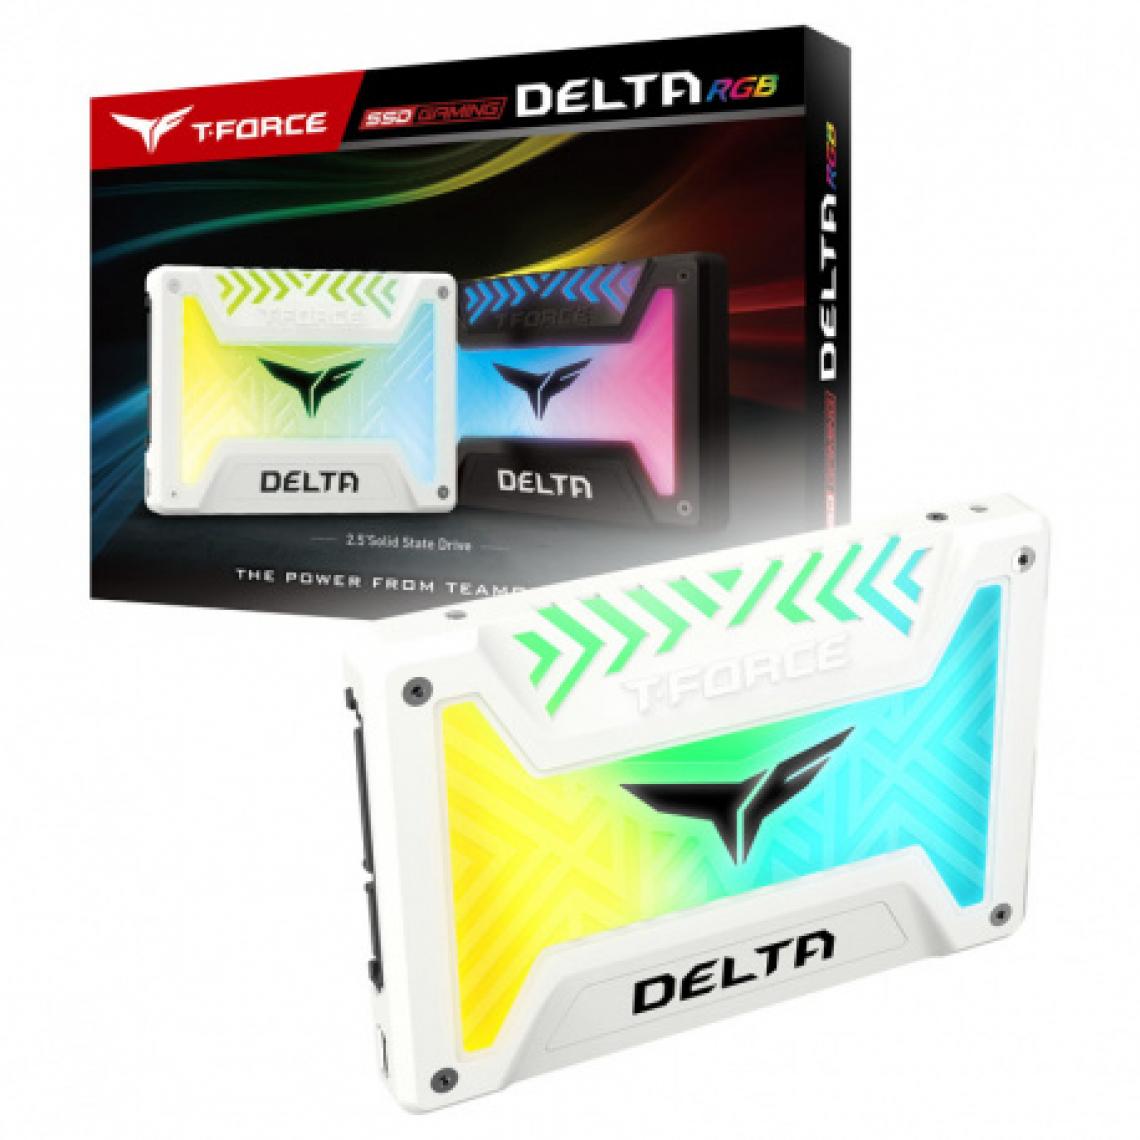 Team Group - T-Force Delta RVB 2 5 pouces SSD SATA 6G - 1 To blanc - SSD Interne